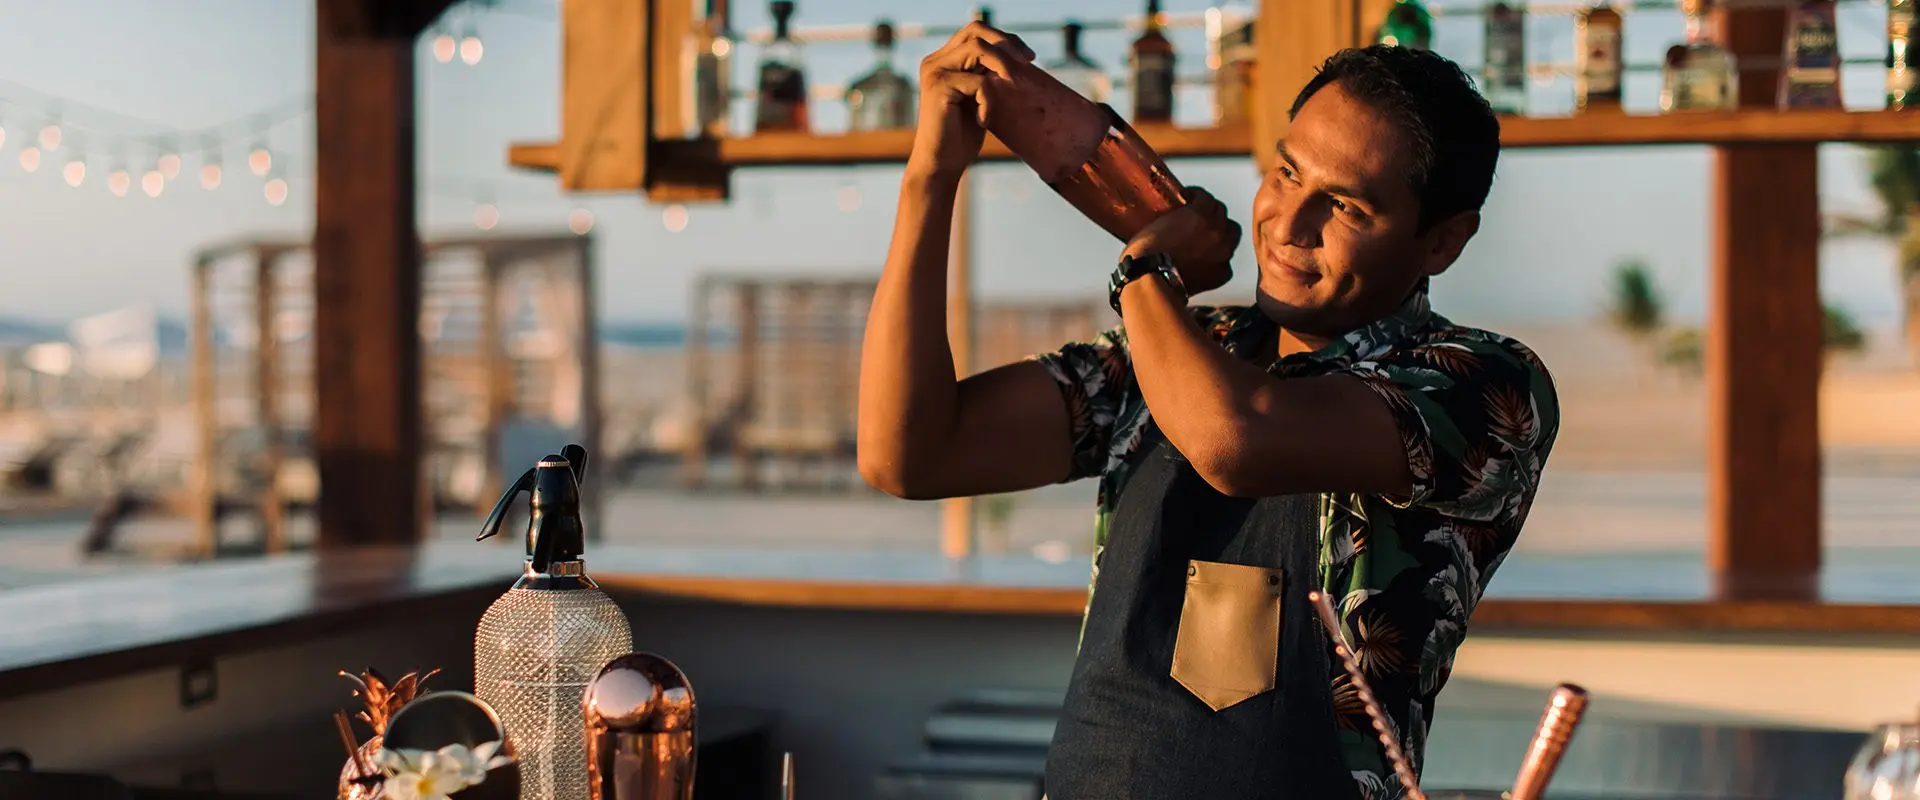 picture of bartender doing tricks in open bar on beach